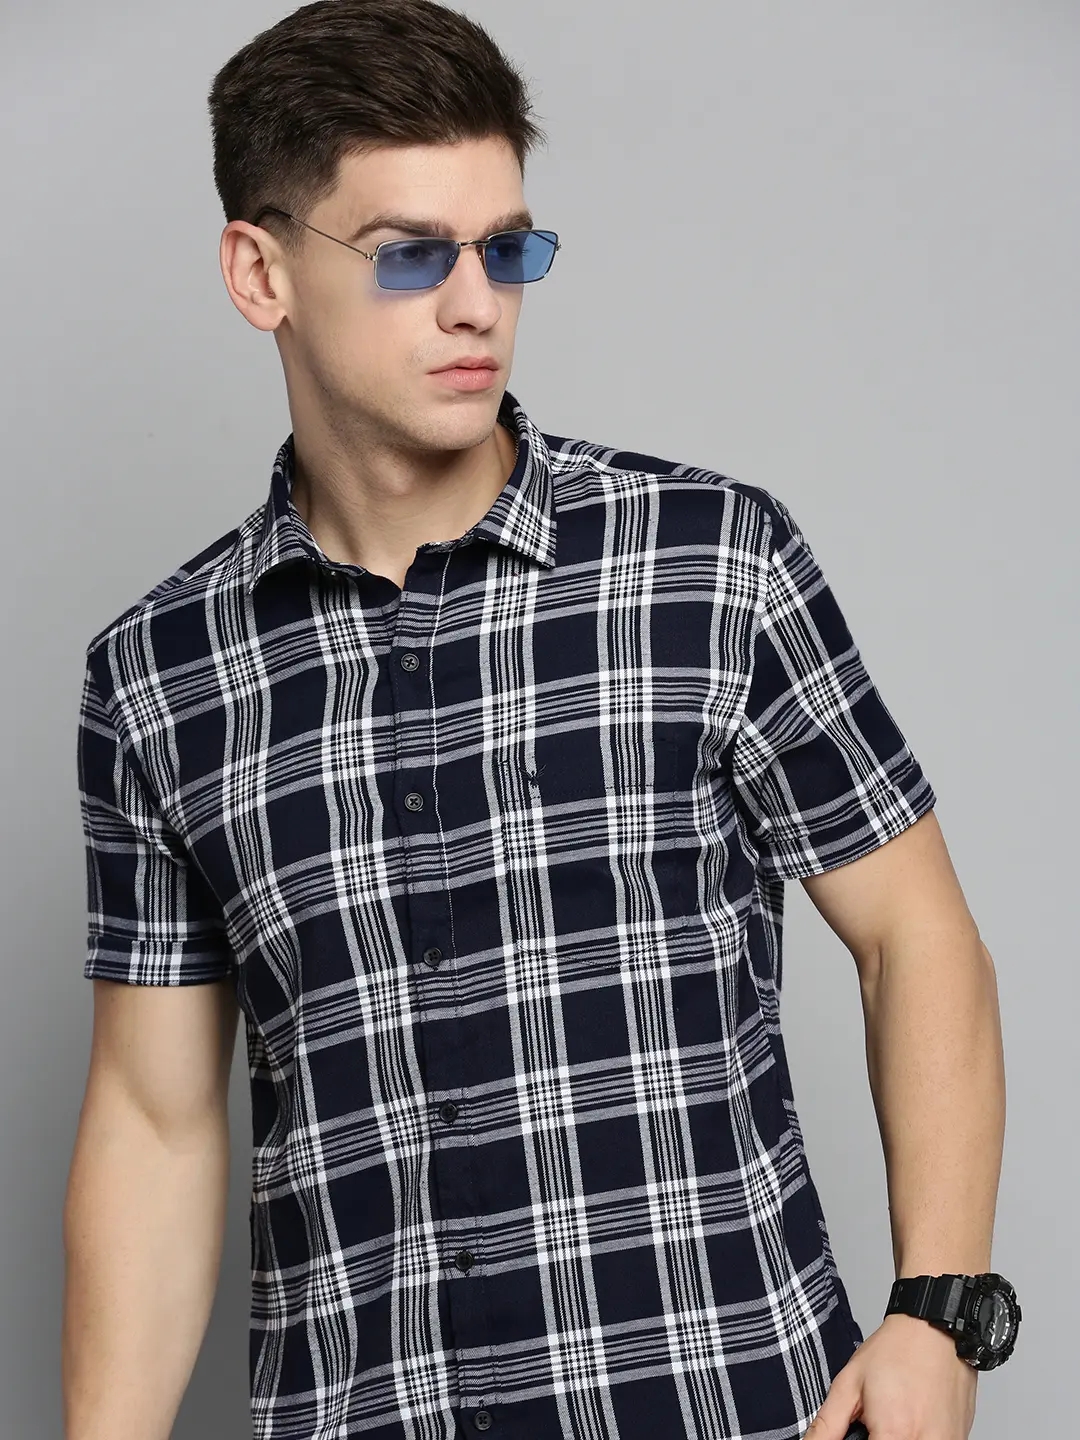 SHOWOFF Men's Spread Collar Navy Blue Checked Shirt